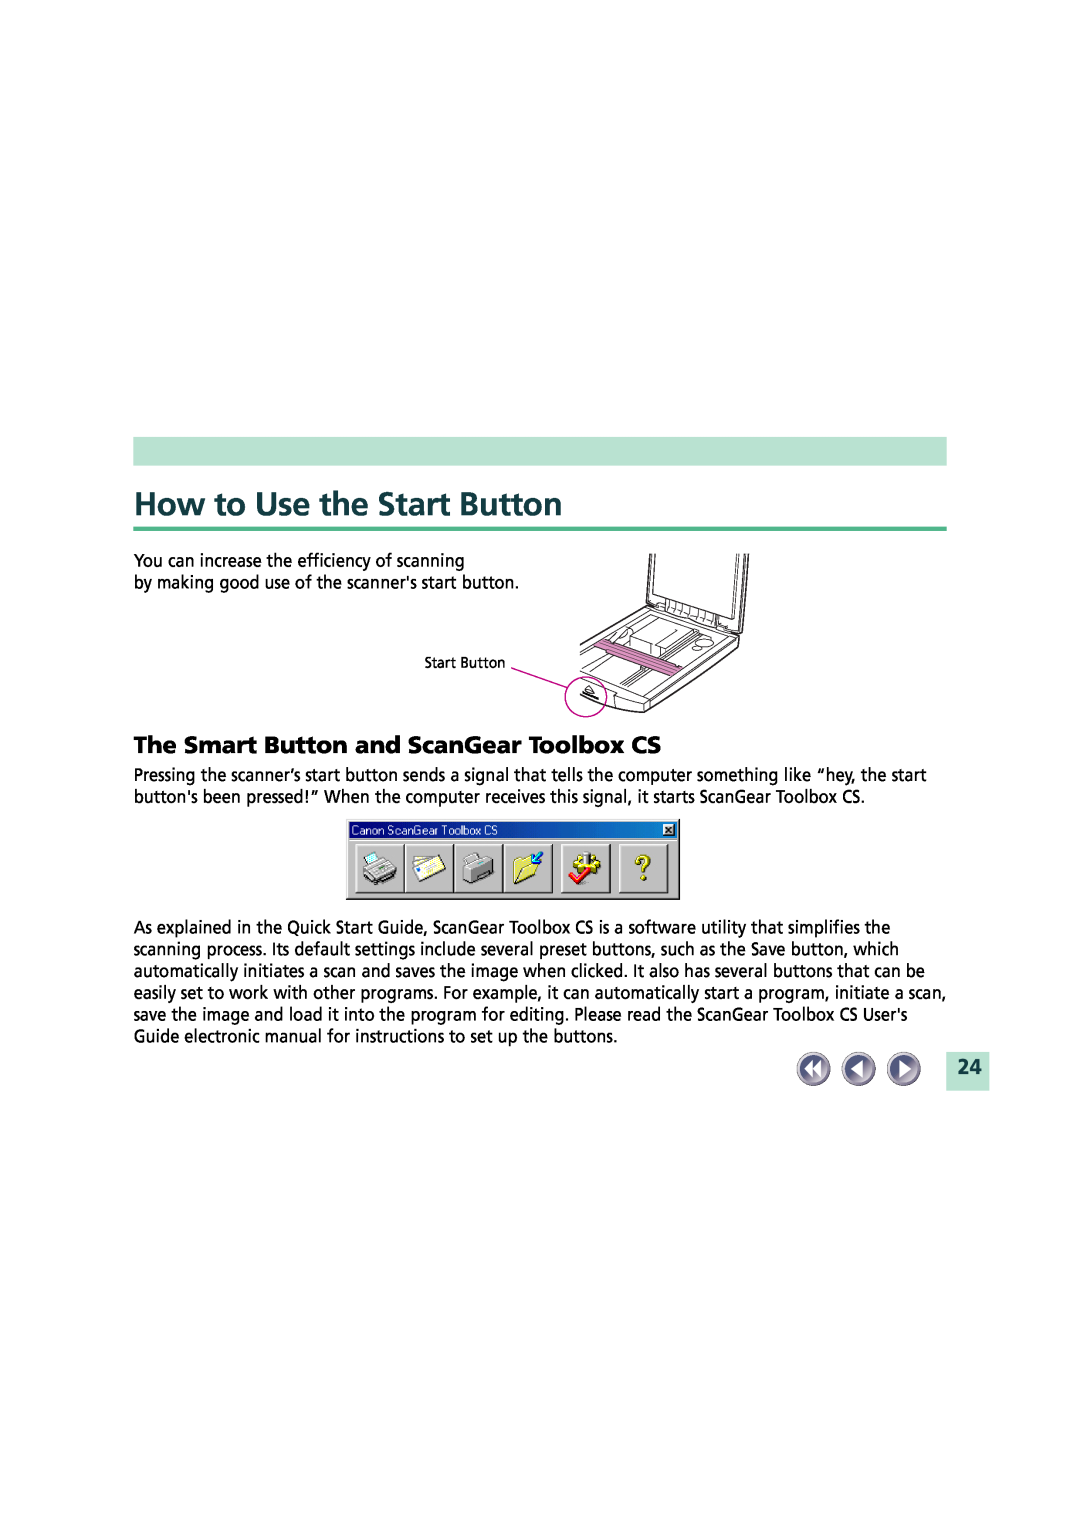 Canon FB620U manual How to Use the Start Button, The Smart Button and ScanGear Toolbox CS 